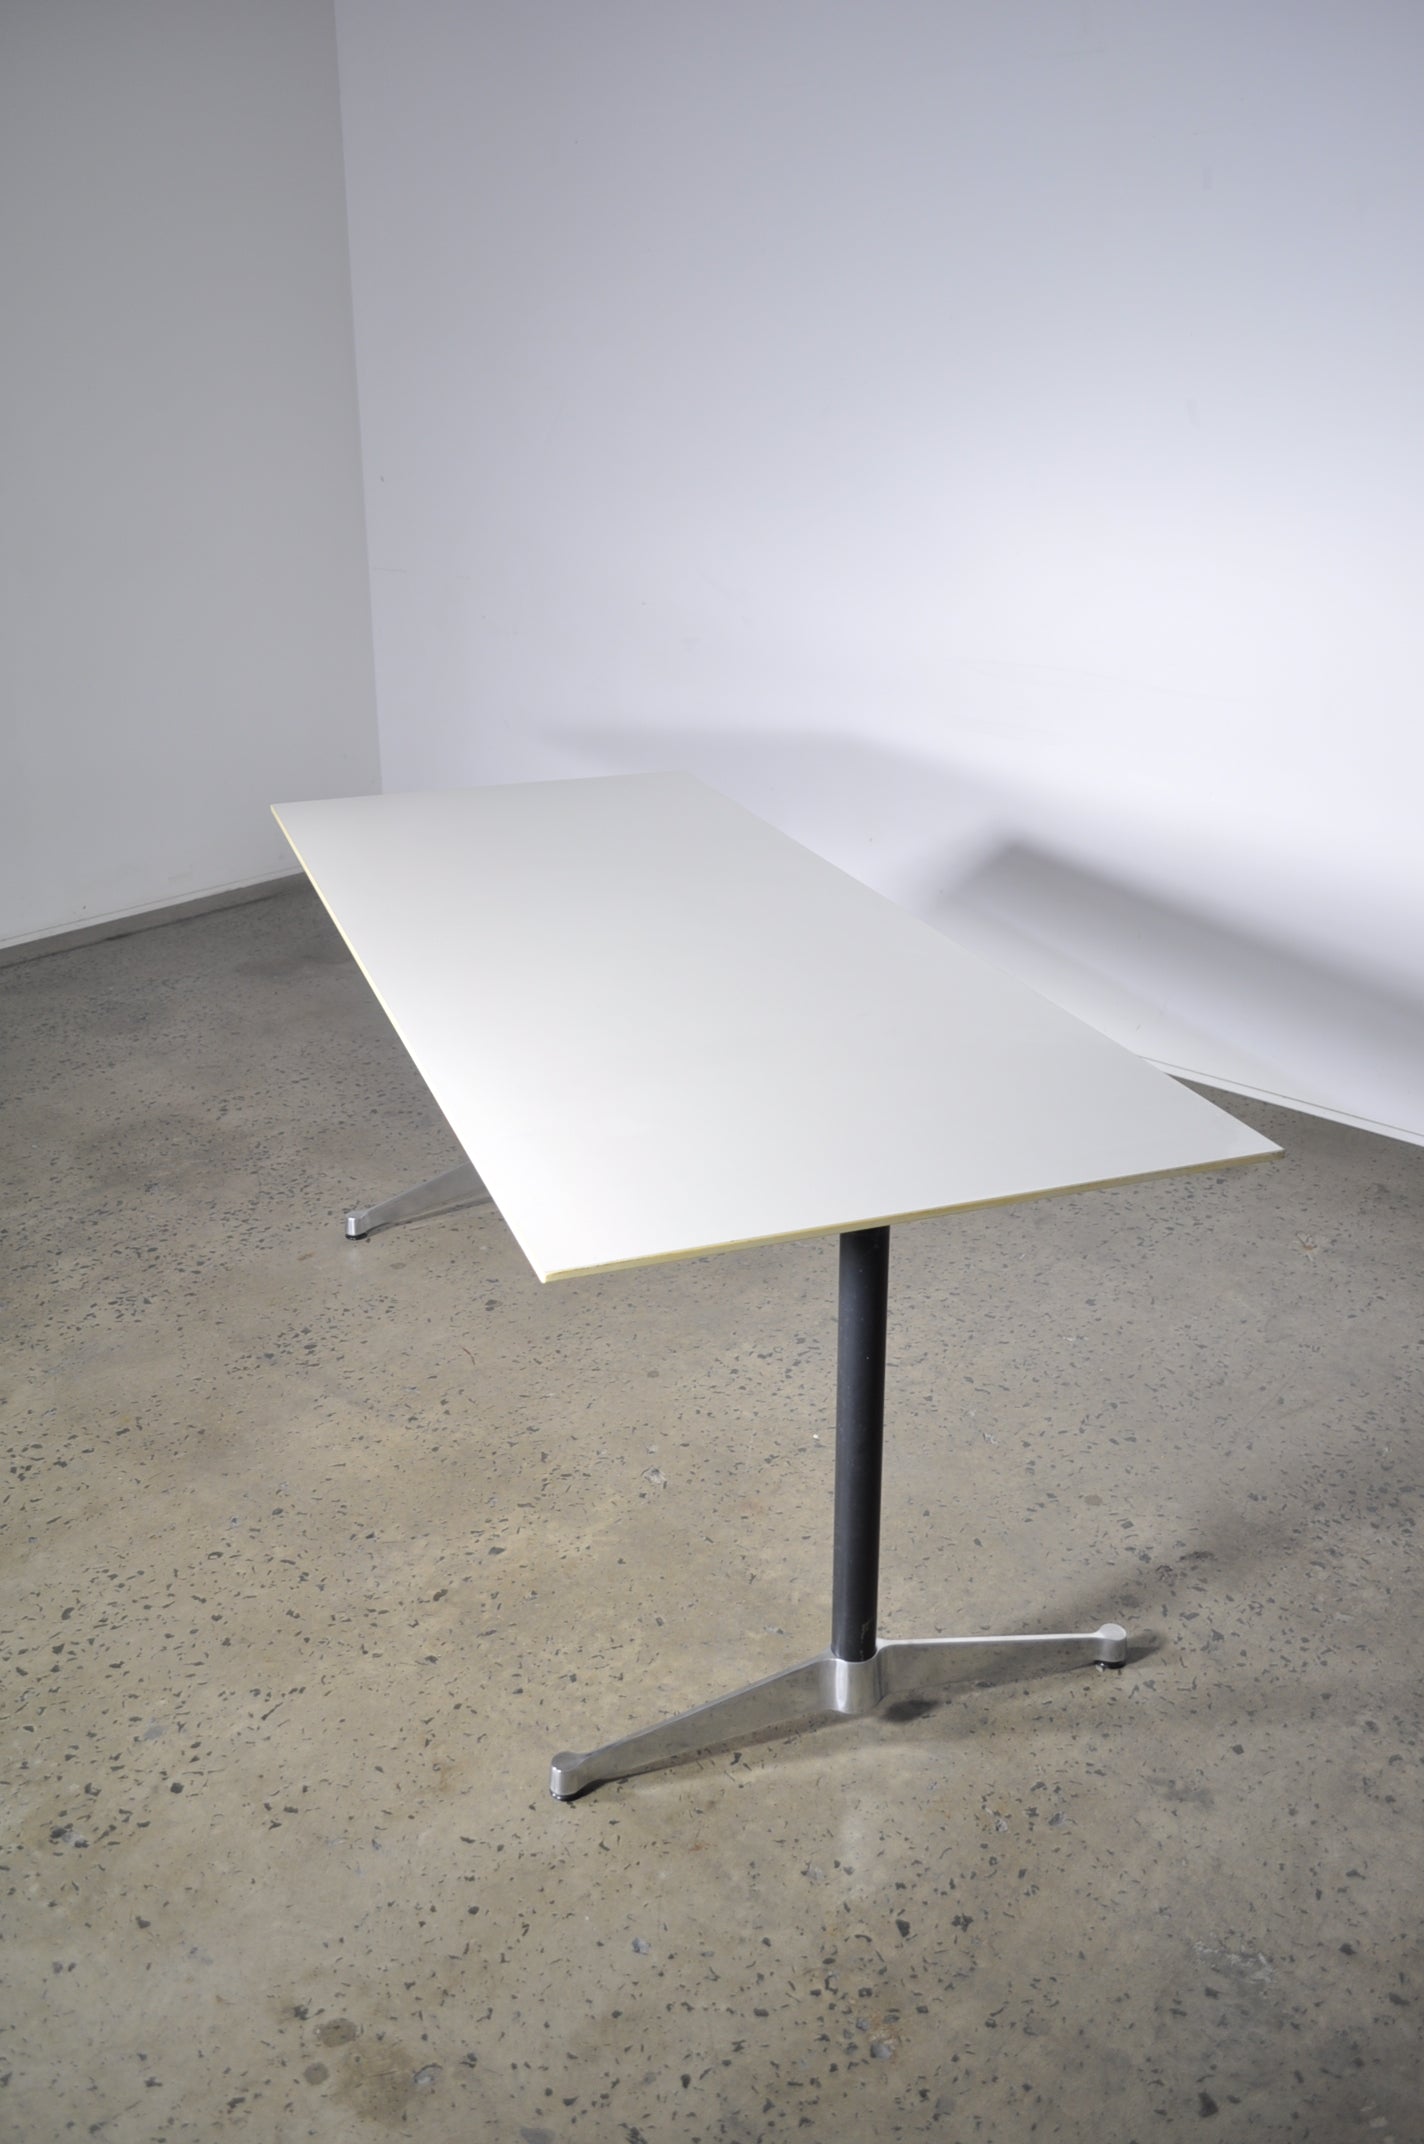 Vitra Table by Eames.